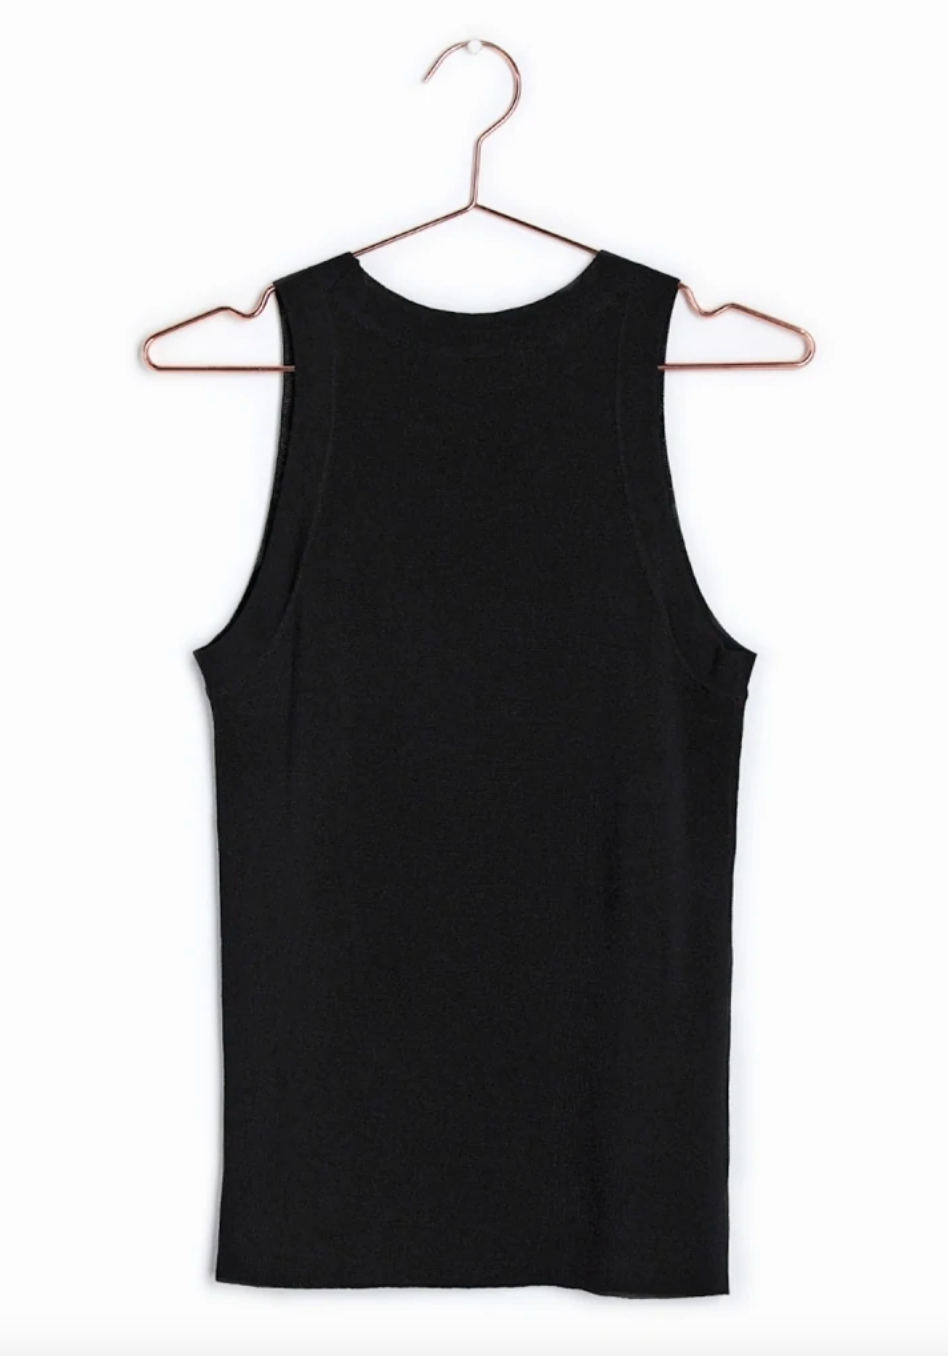 THE SIGNY TOP BLACK